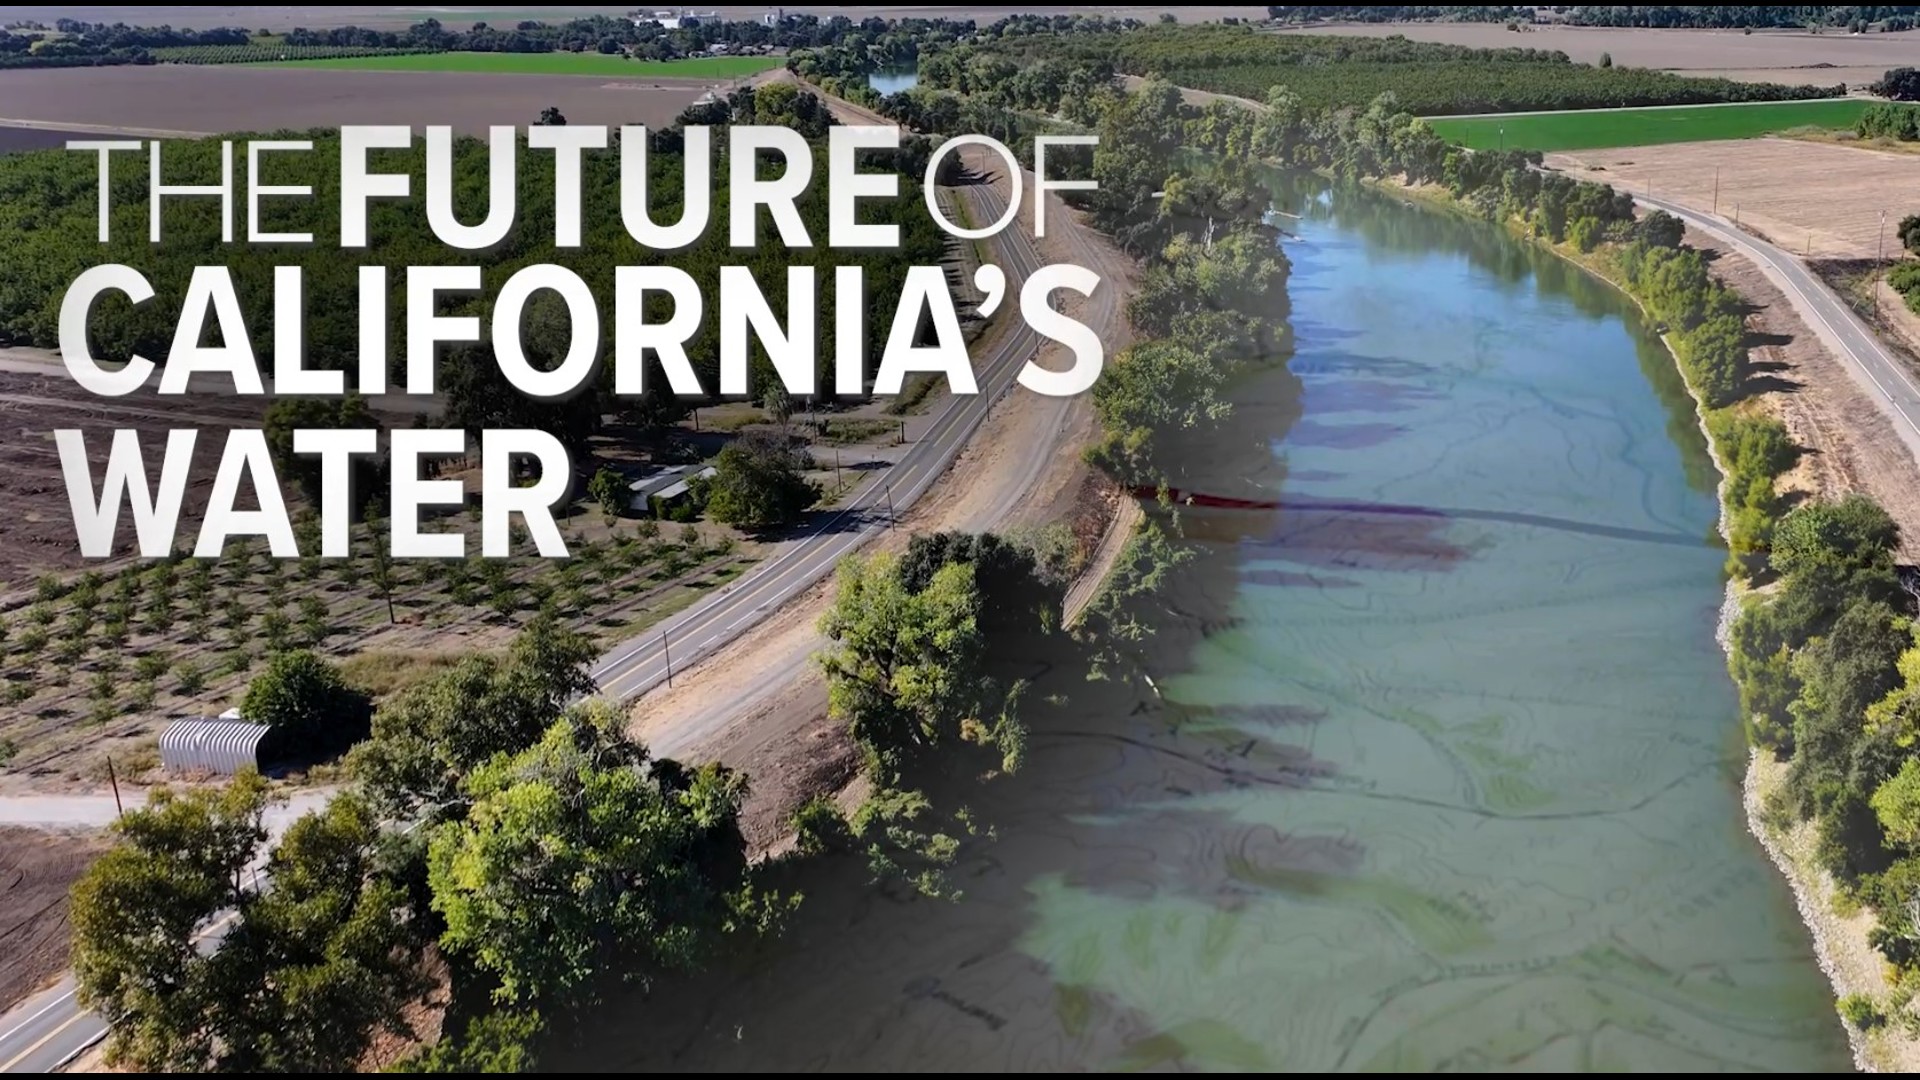 In this ABC10 Weather investigation, the team looks into what the future holds for California's water.